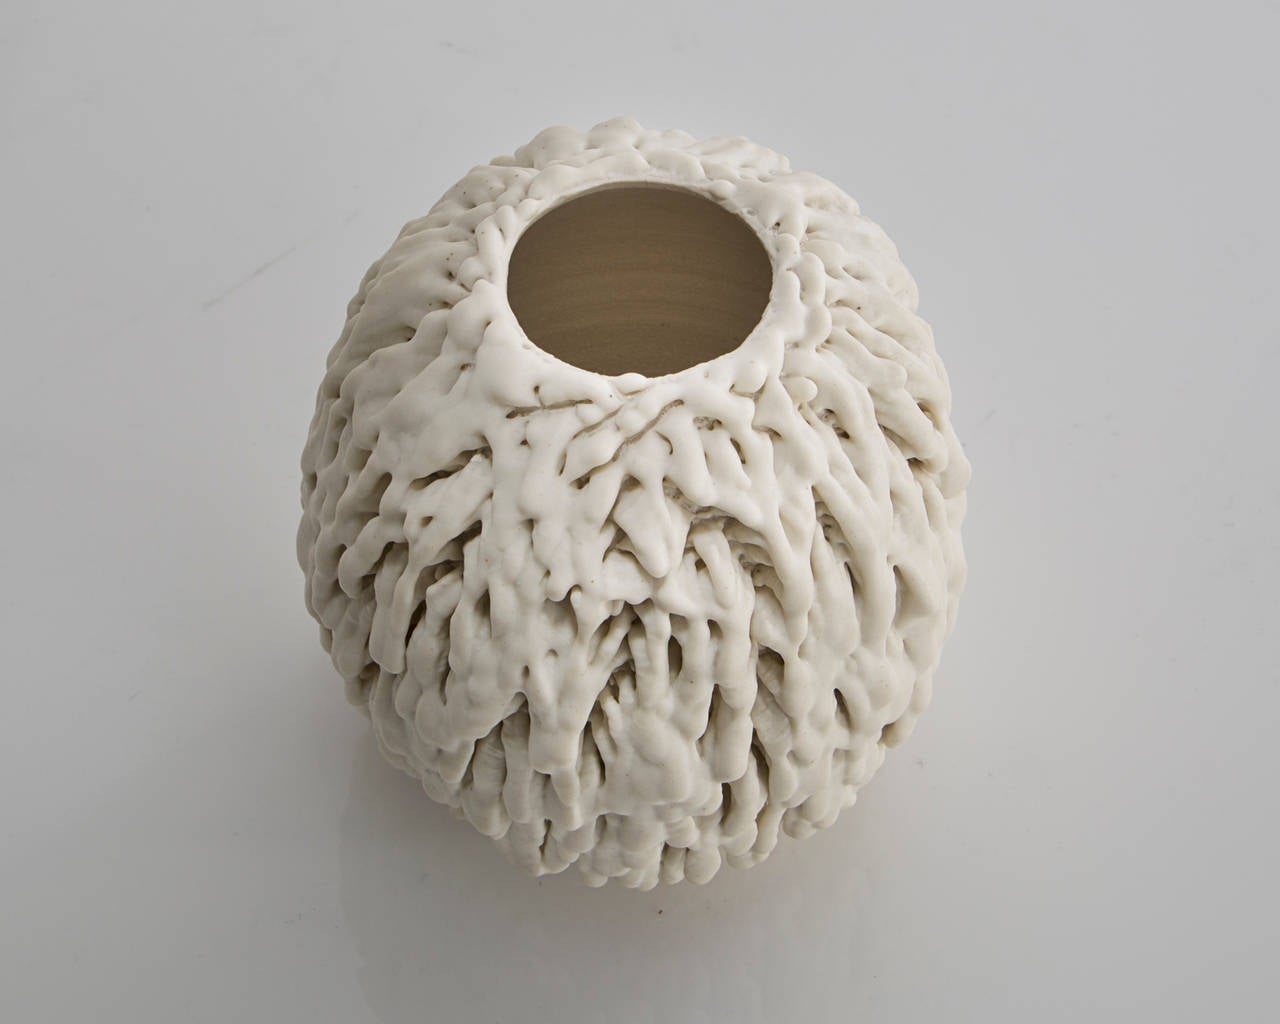 SM5644.

Unique, hand-thrown melted Urchin Accretion vase with porcelain slip in white star glaze. Designed and made by The Haas Brothers, Los Angeles, CA, 2014.